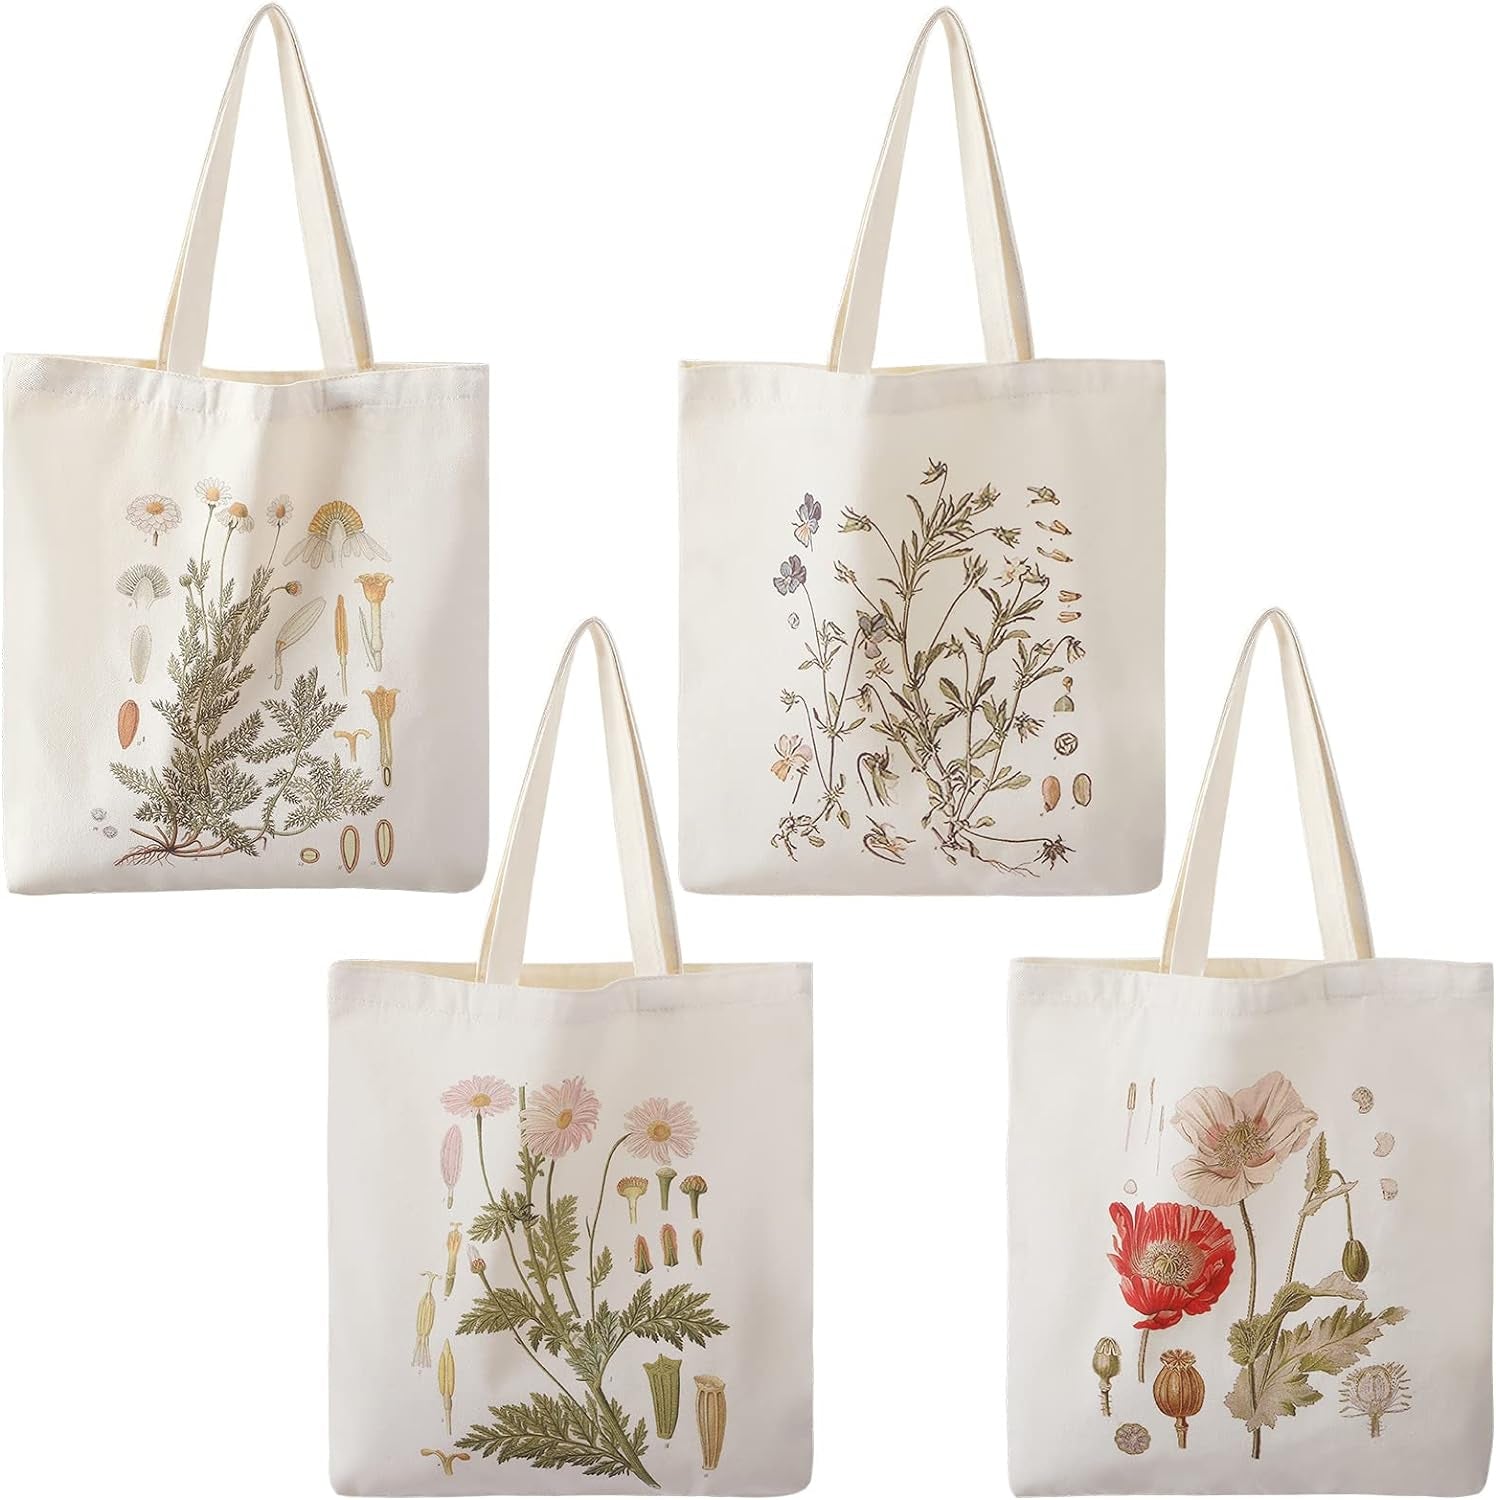 Floral Canvas Tote Bag 4 Pieces Botanical Shopping Bag Aesthetic Flower Tote Grocery Bag for Women Girl Shopping